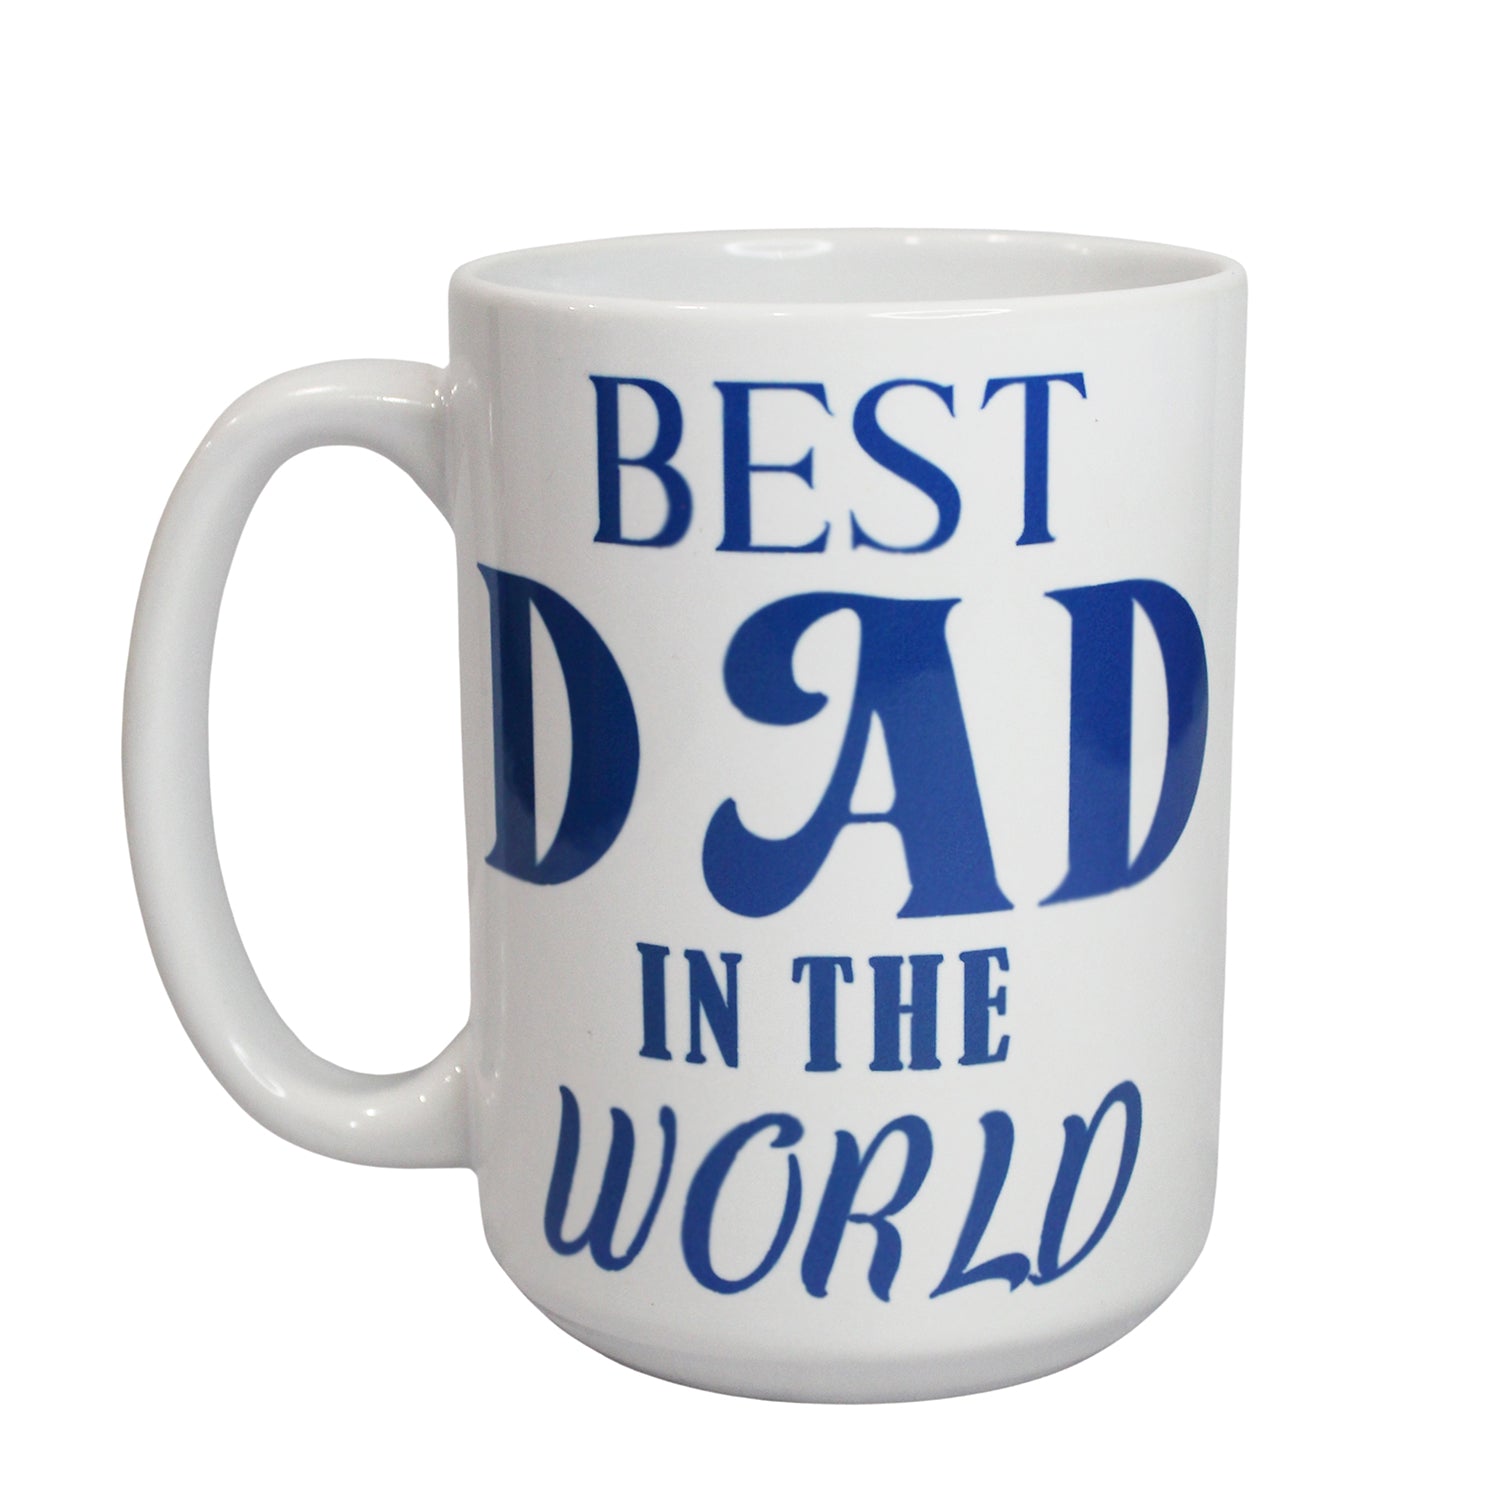 The Best Dad In The World Coffee Mugs, 15 oz Coffee Mugs, Fathers Day Coffee Cups, Men Coffee Mugs, Novelty Mugs - Main